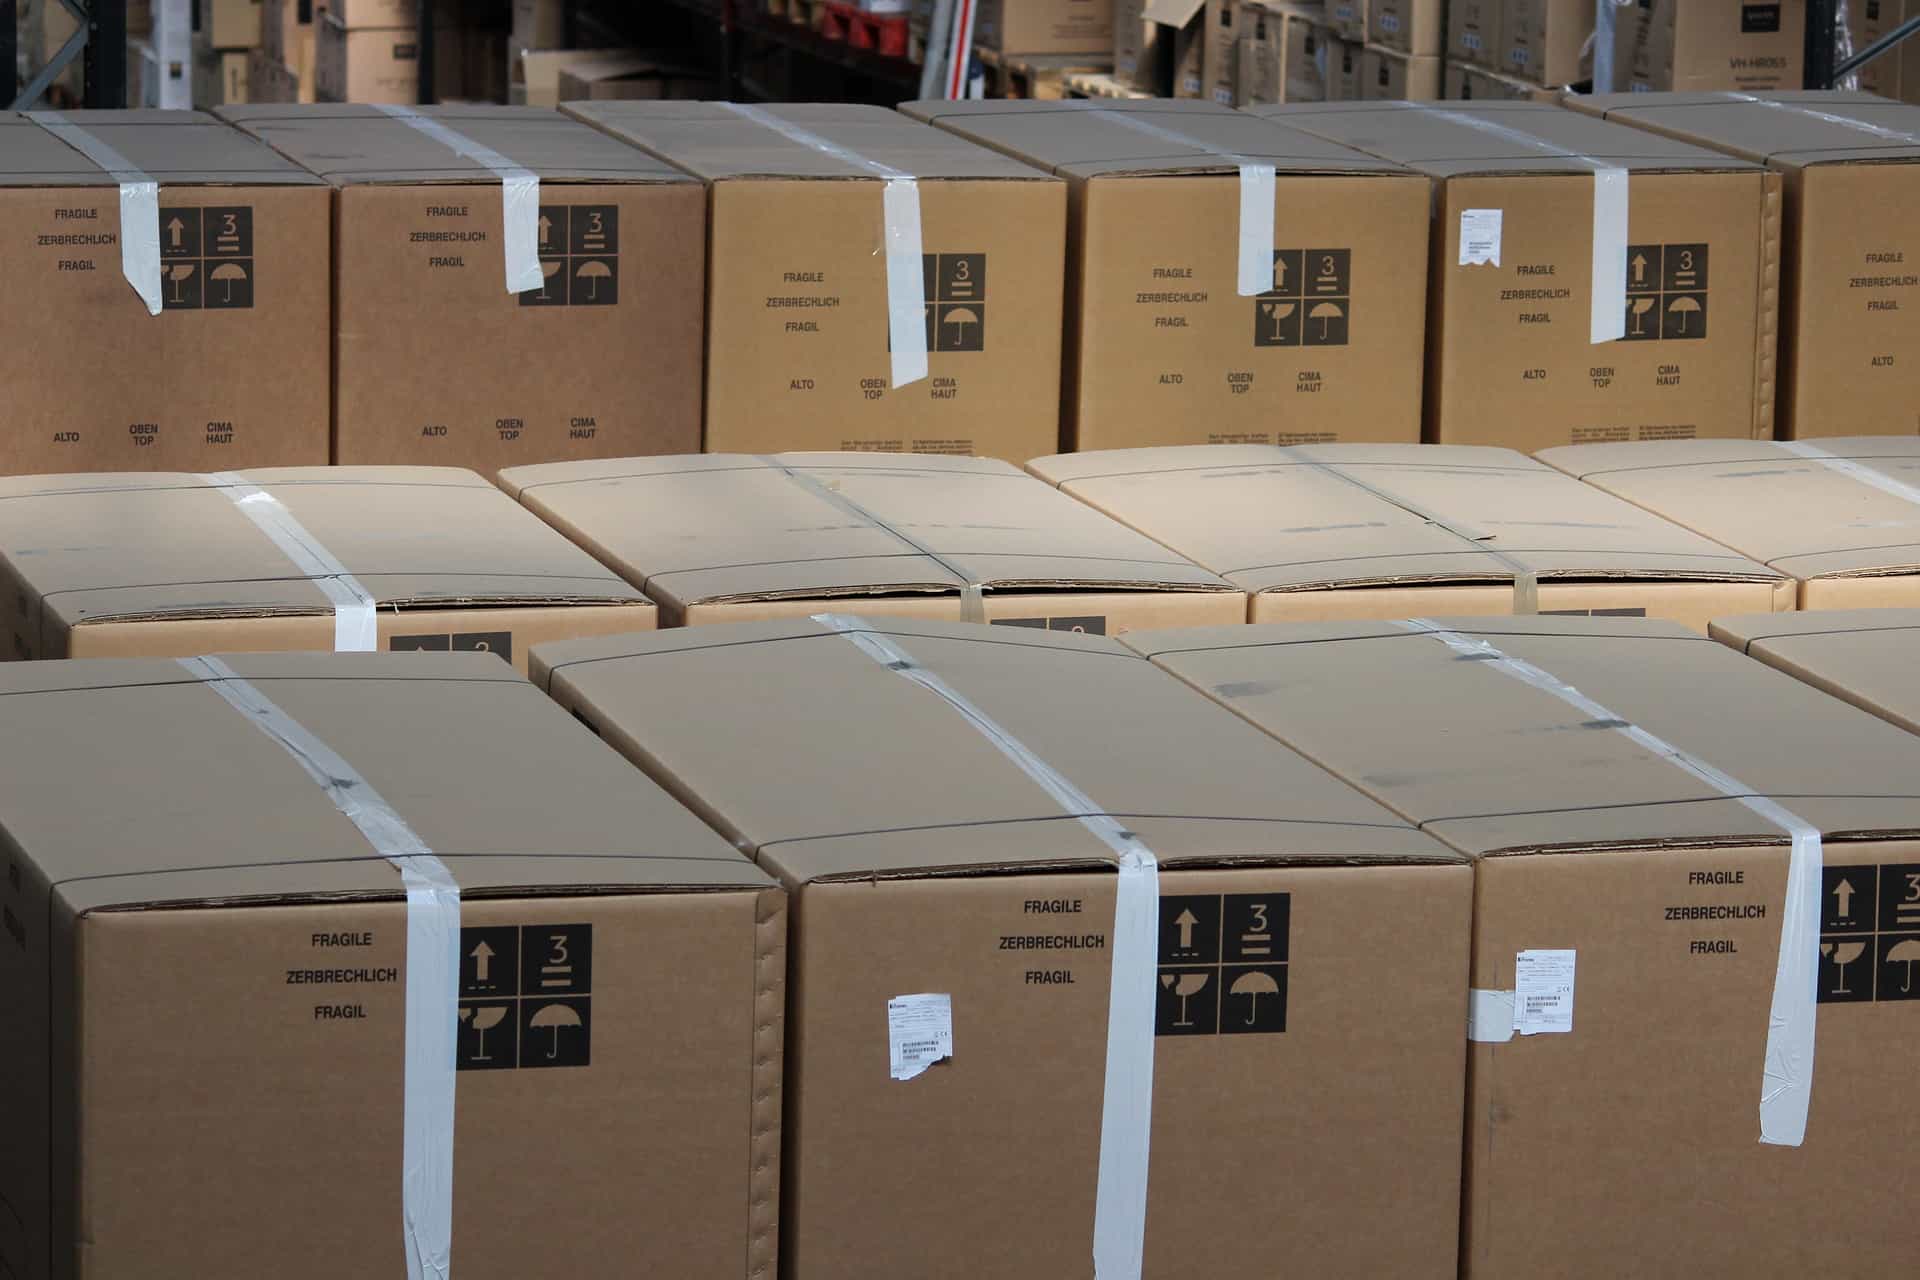 Rows of packed boxes